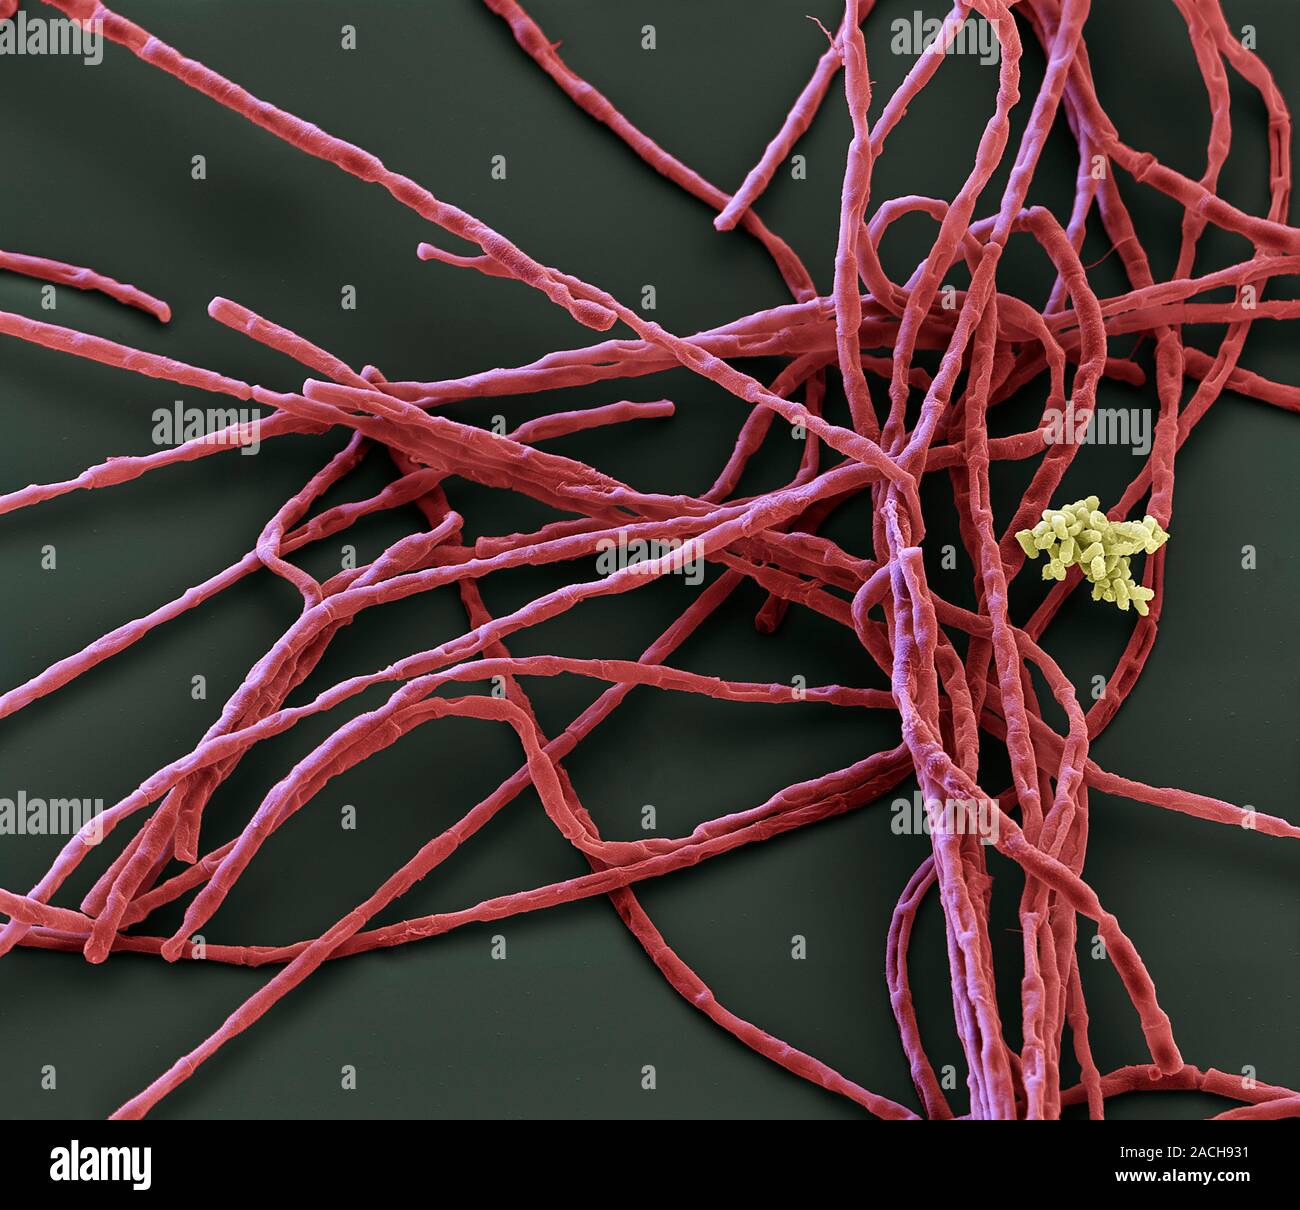 Anthrax Bacteria Coloured Scanning Electron Micrograph Sem Of Bacillus Anthracis Bacteria 4650